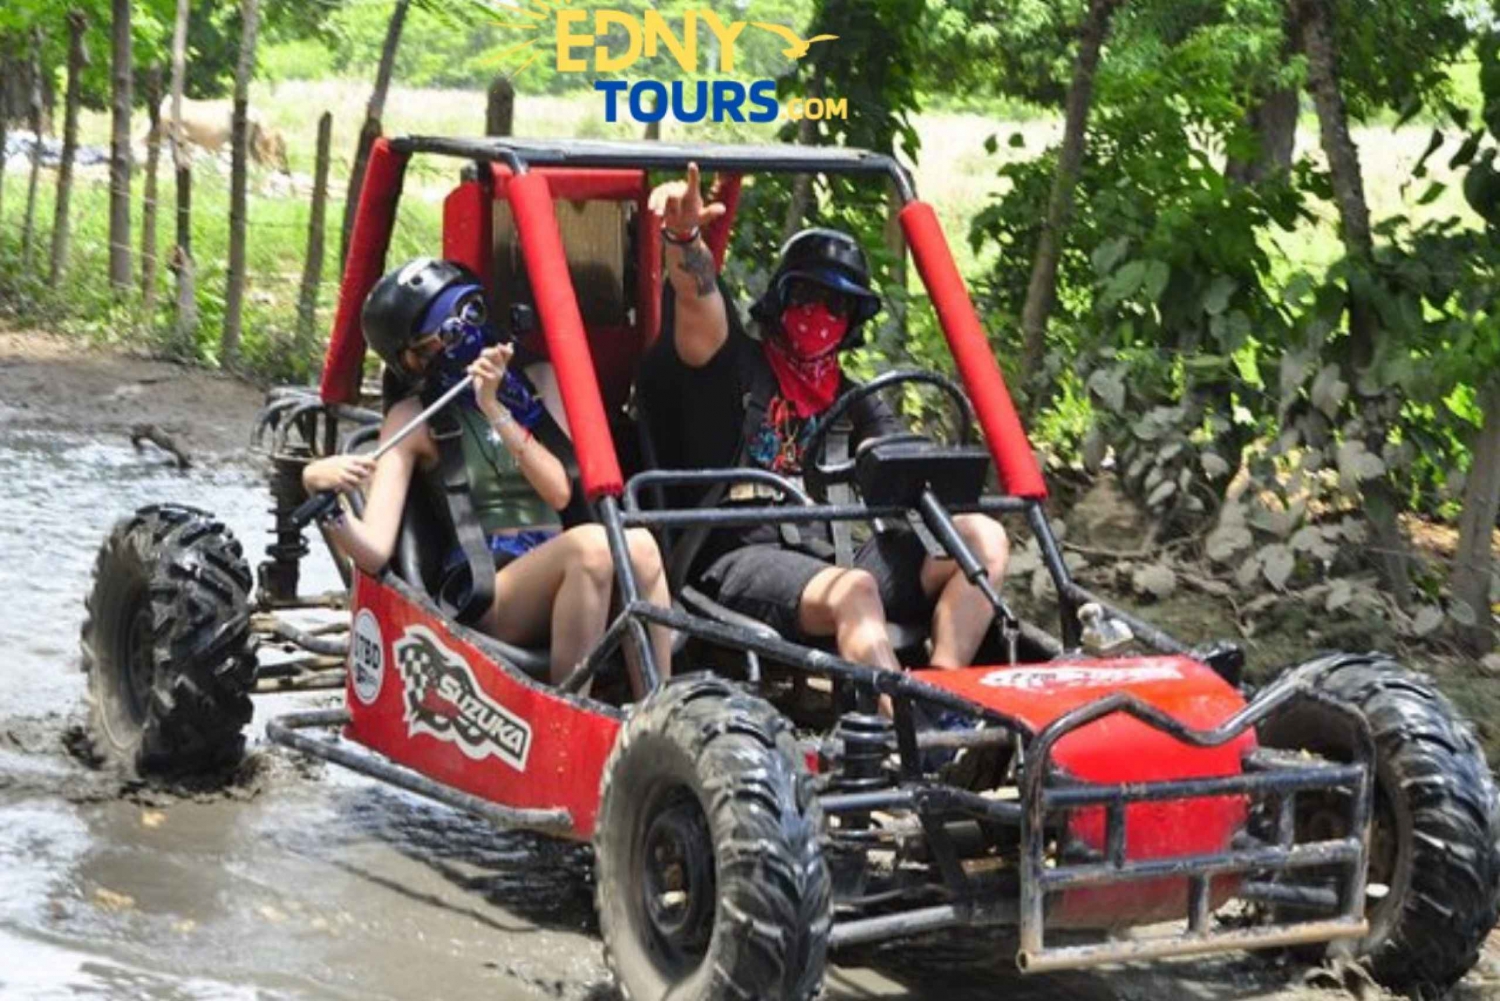 From Punta Cana: Buggy Tour to Macao Beach and Cenote